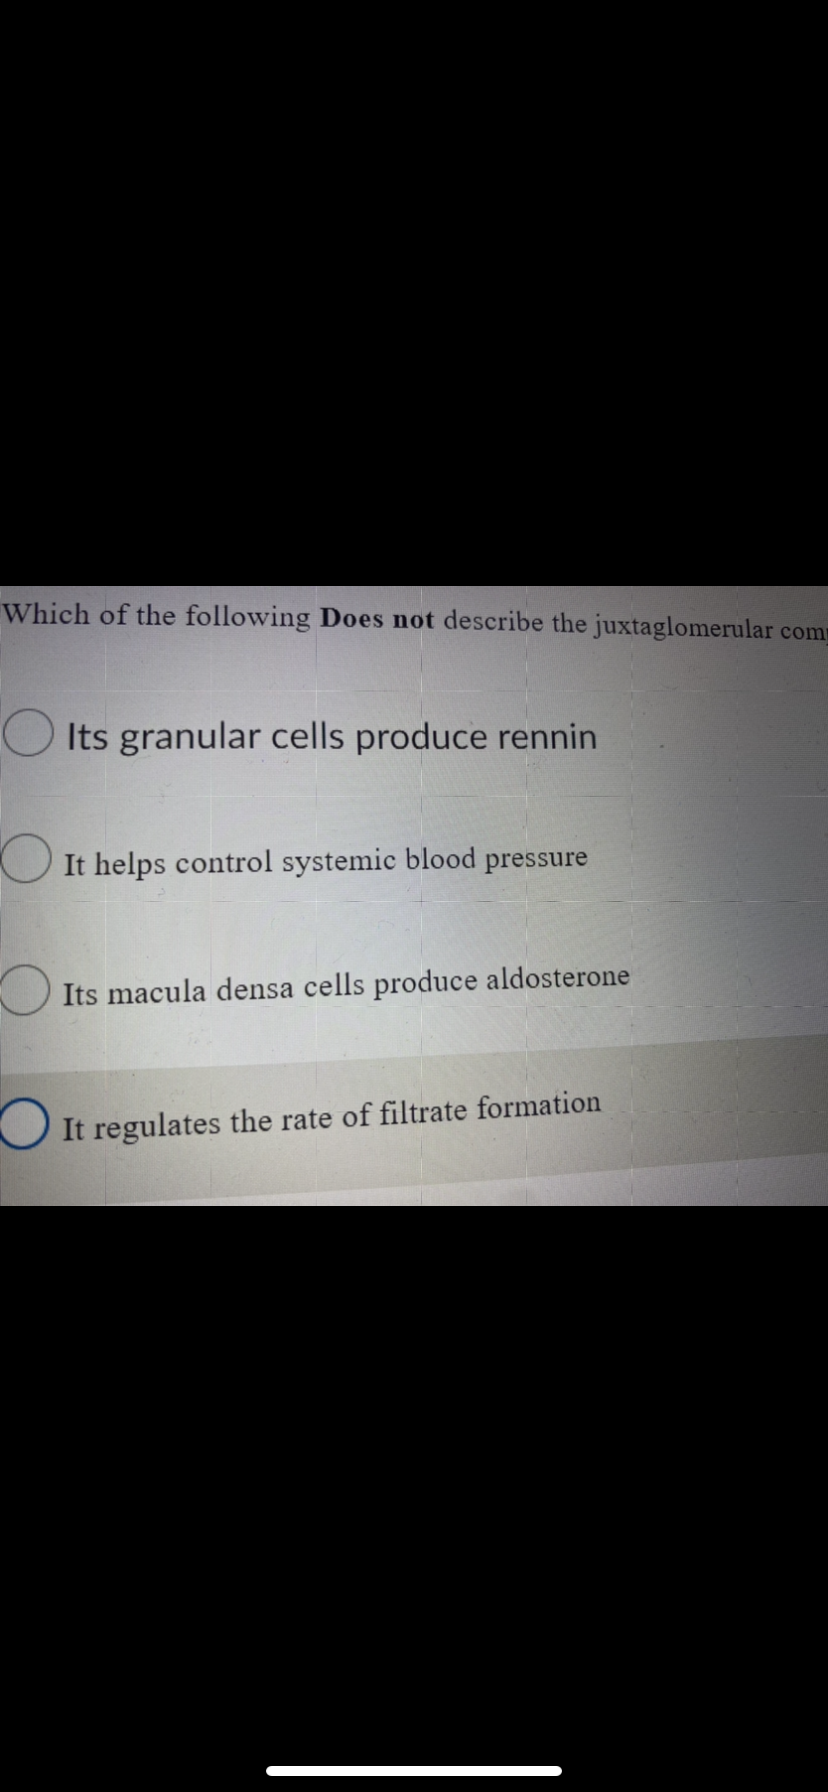 Which of the following Does not describe the juxtaglomerular com
Its granular cells produce rennin
It helps control systemic blood pressure
Its macula densa cells produce aldosterone
It regulates the rate of filtrate formation
